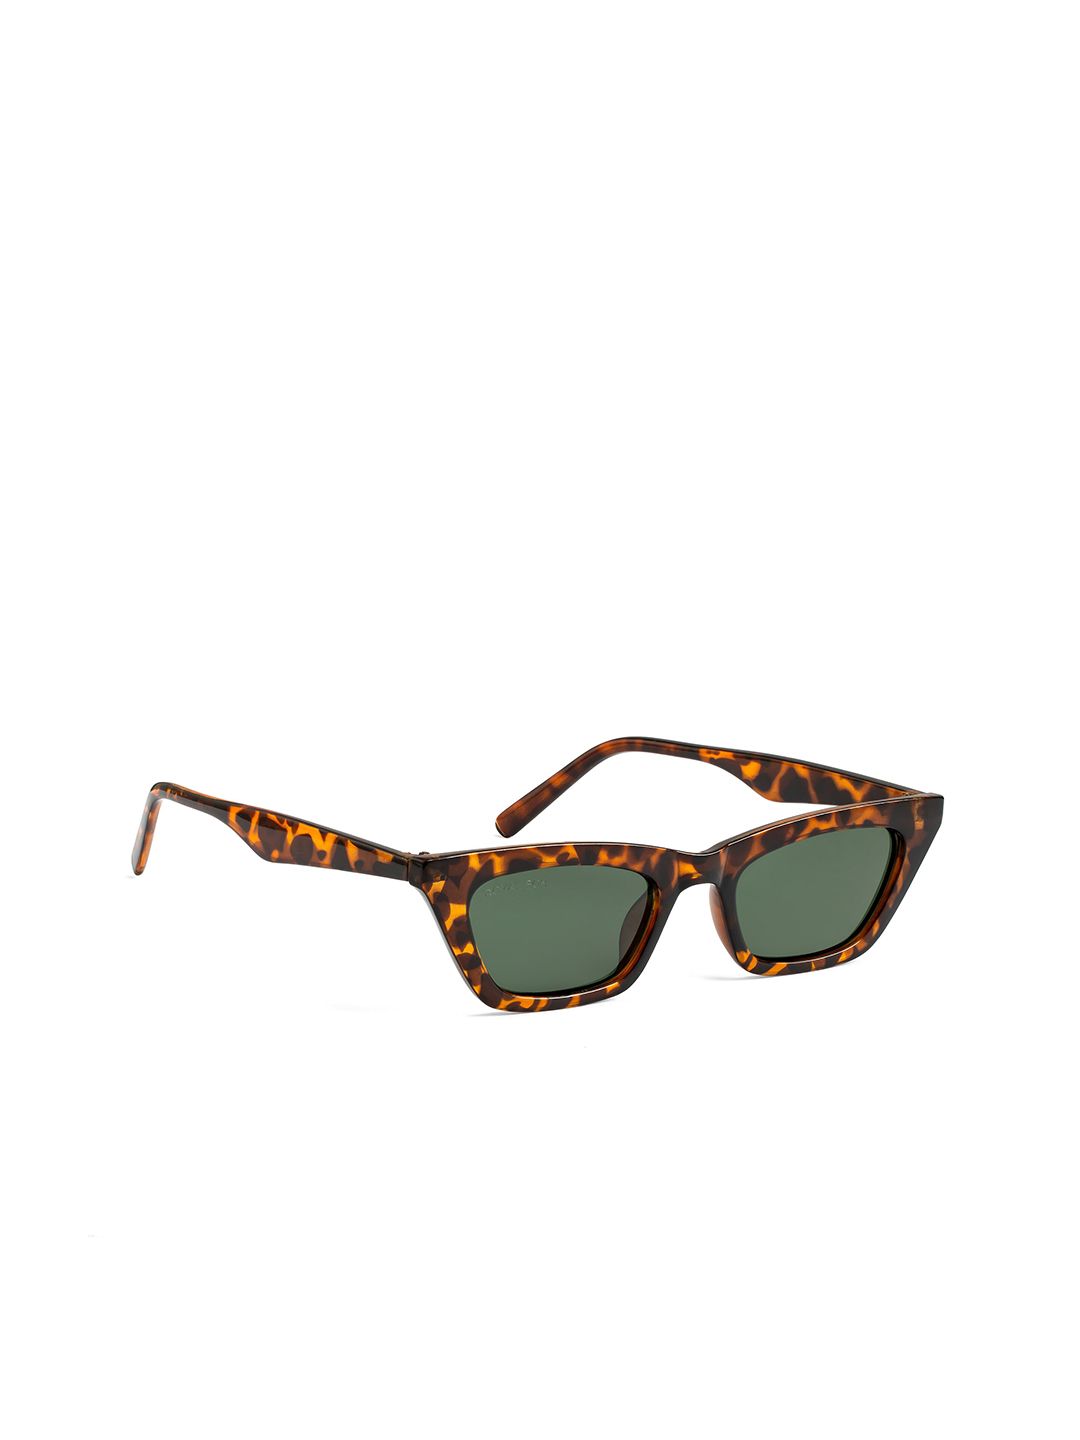 ROYAL SON Women Green Lens & Brown Cateye Sunglasses CHIWM00125-C5 Price in India